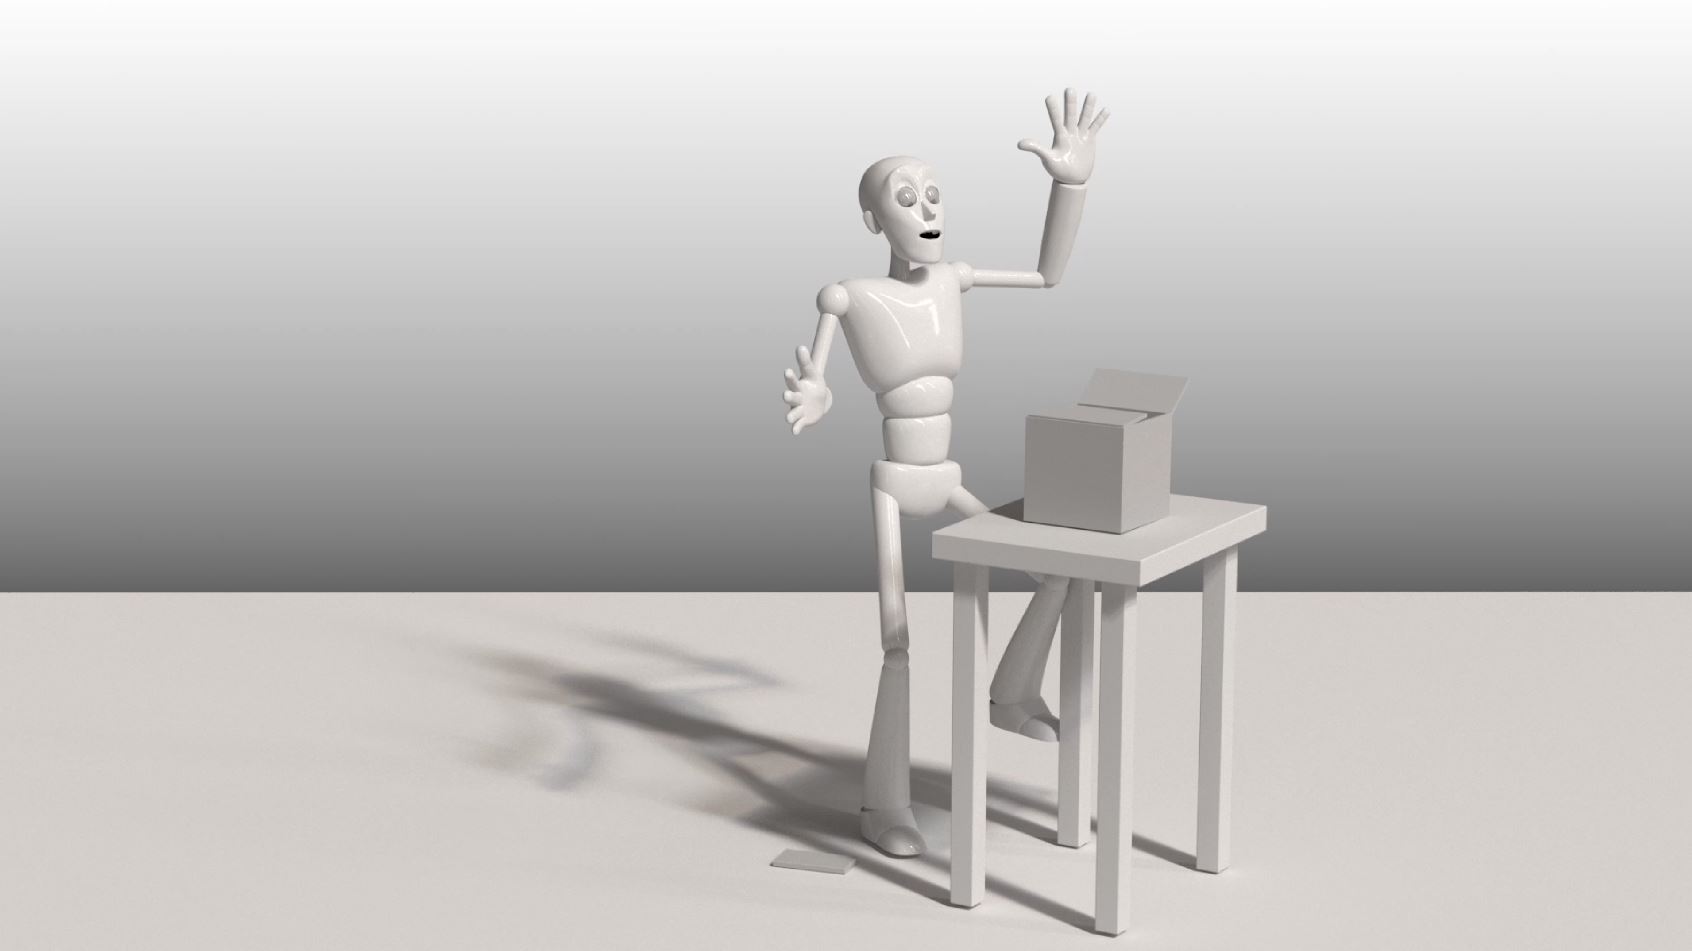 A 3D animaed character from our Animation project